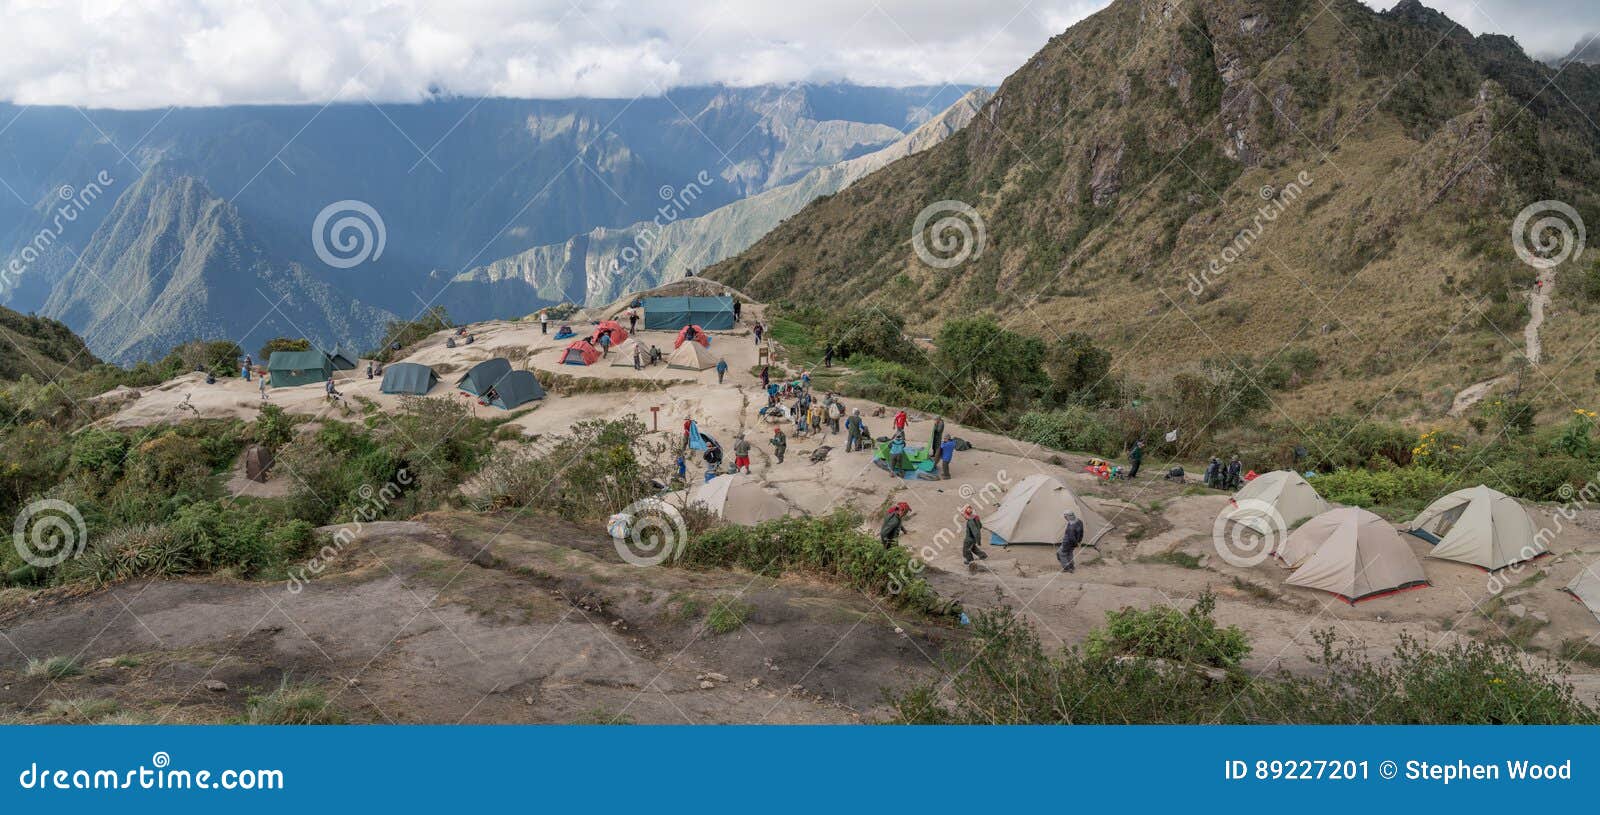 camping on the inca trail